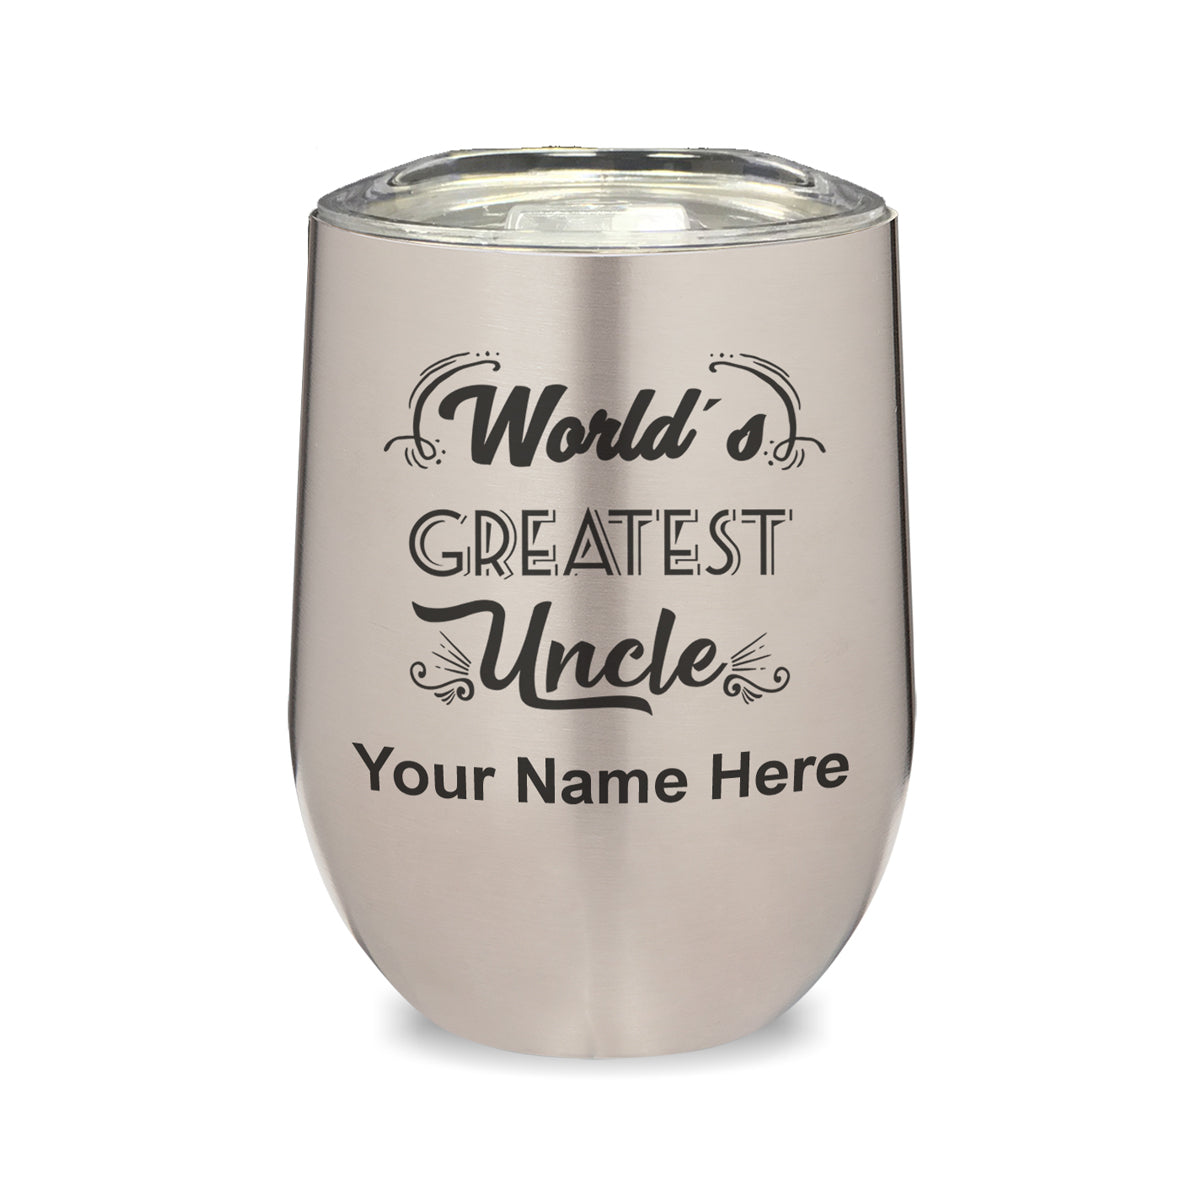 LaserGram Double Wall Stainless Steel Wine Glass, World's Greatest Uncle, Personalized Engraving Included